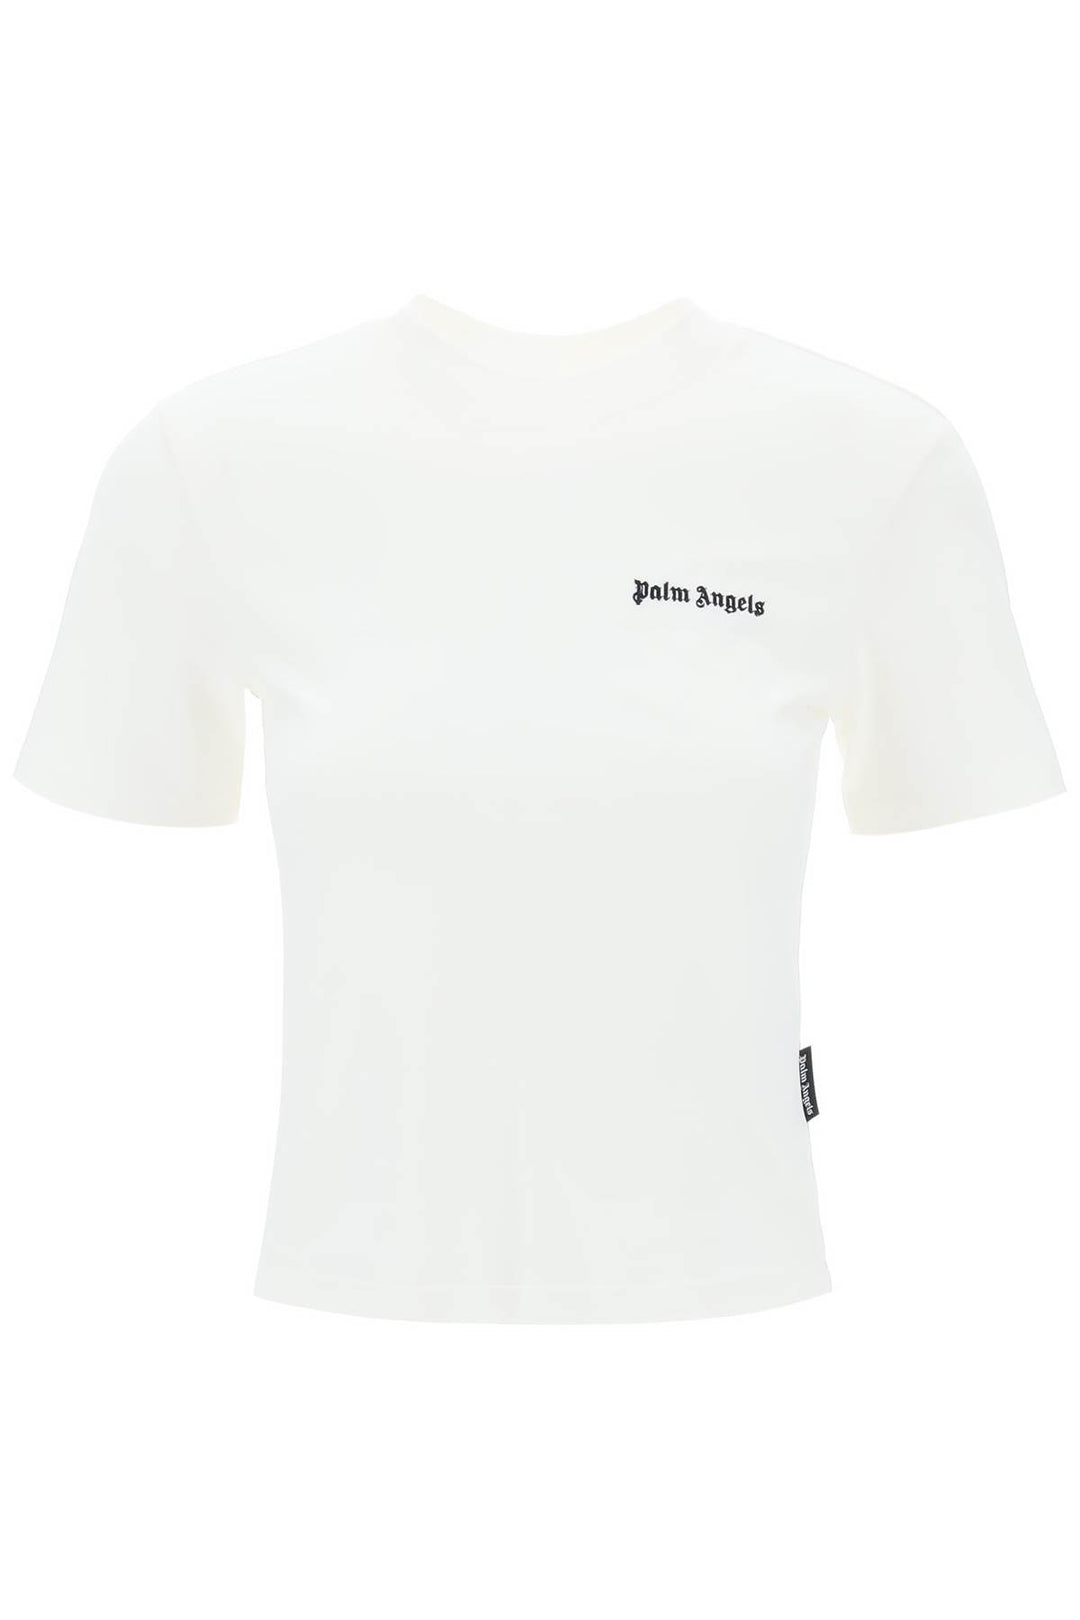 Palm angels "round-neck t-shirt with embroidered-0